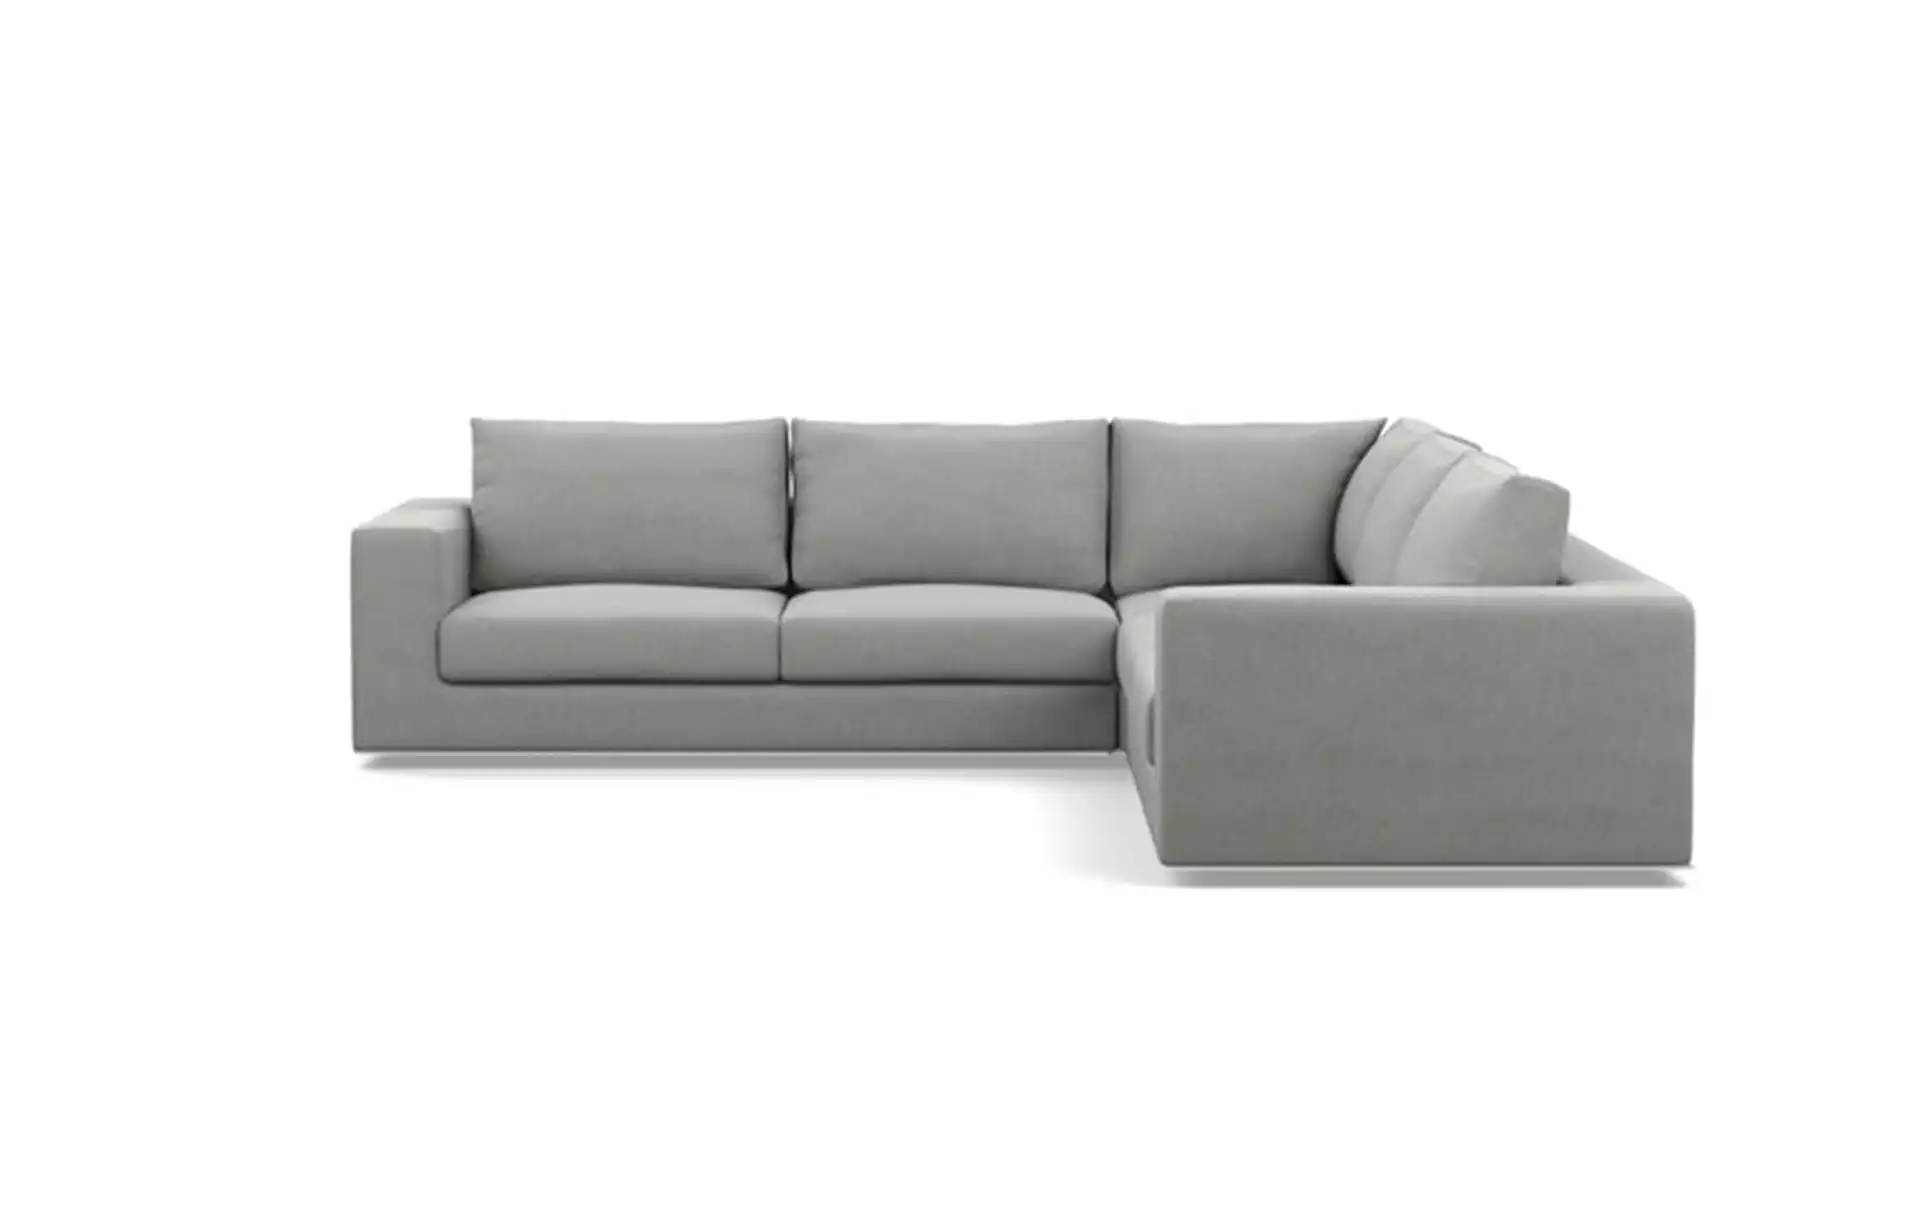 Walters Corner Sectional with Grey Ecru Fabric and down alt. cushions